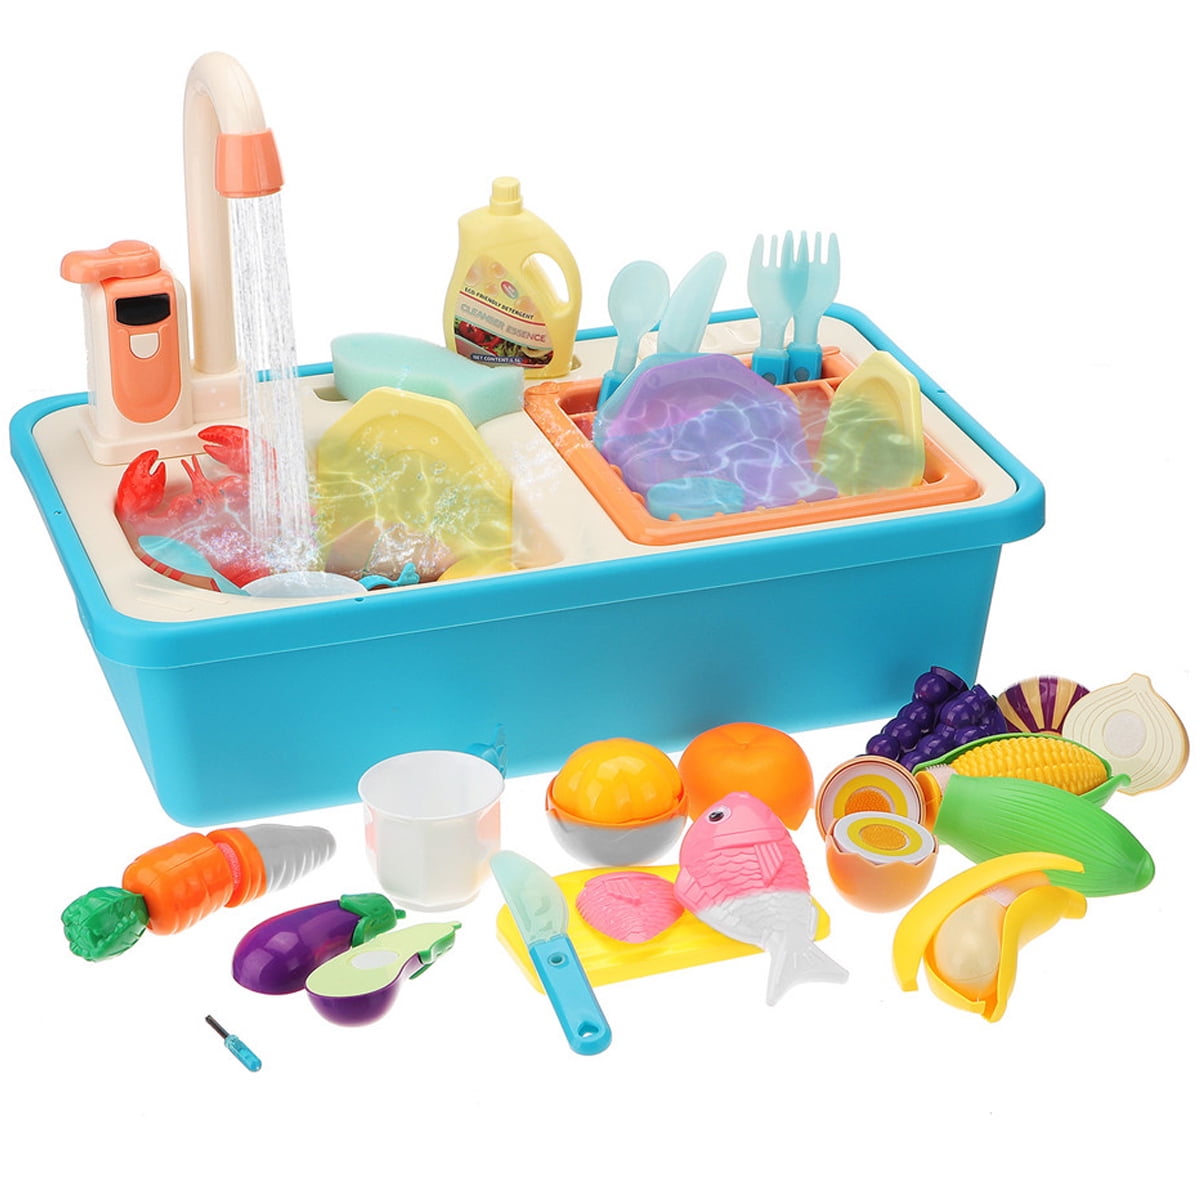 Kids Kitchen Play Set Toys Pretend Baker Cooking Food Playset with Running Water 